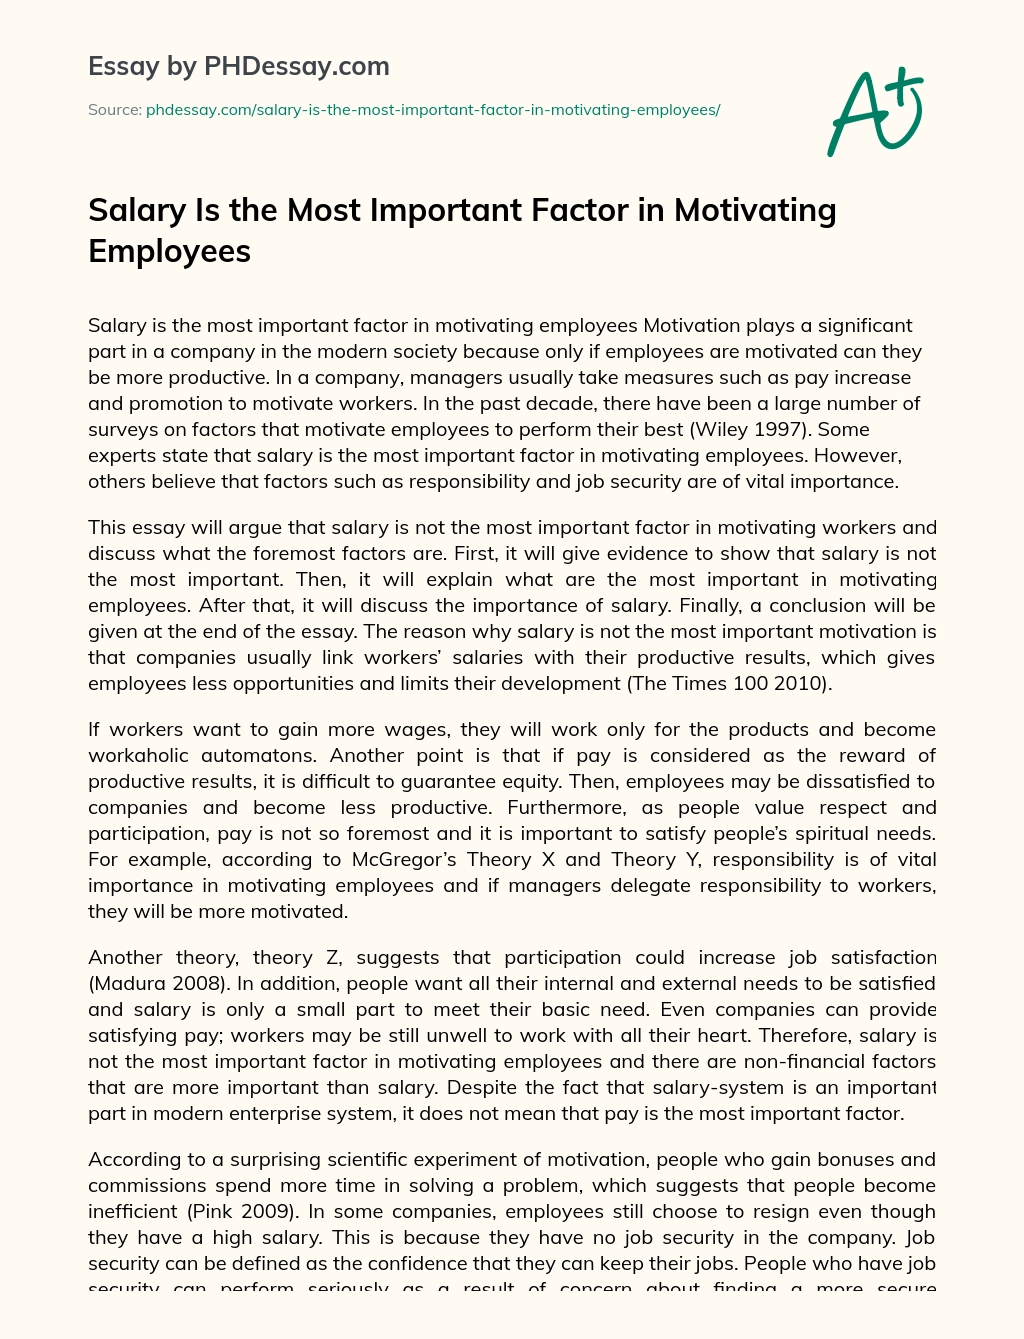 Salary Is the Most Important Factor in Motivating Employees essay